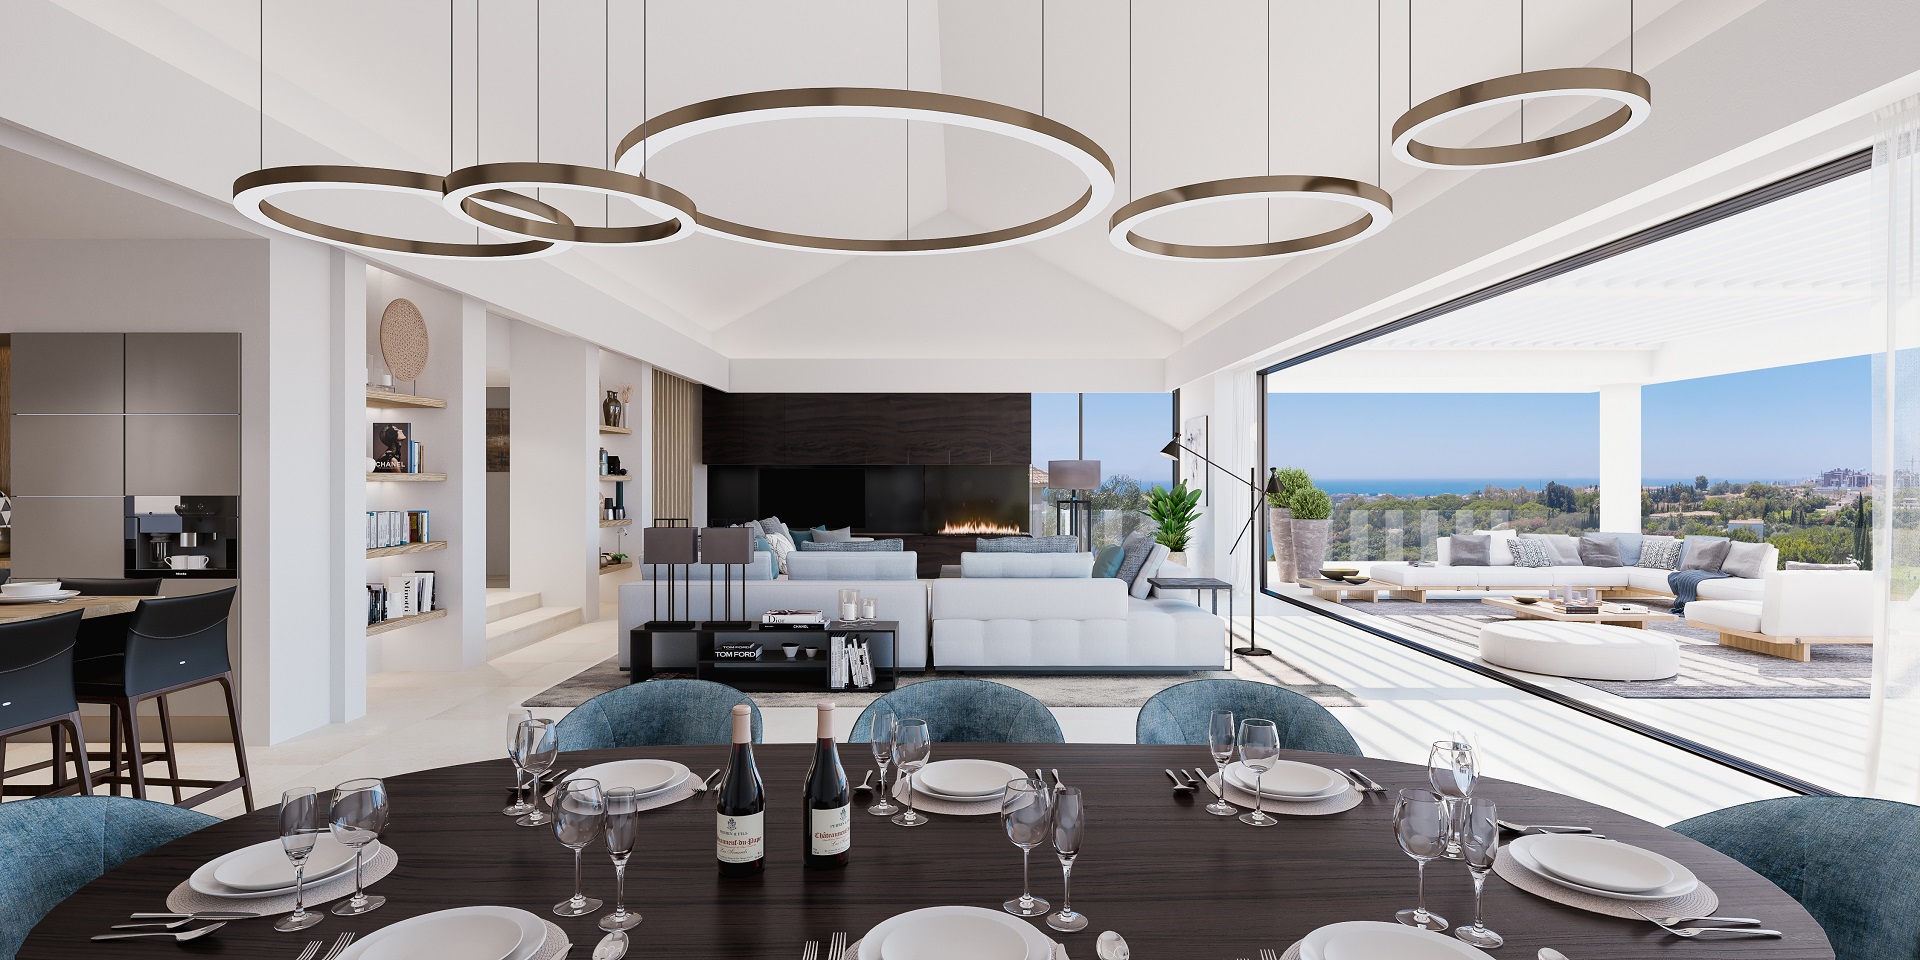 Unique luxury and elegant interior design by Bemont Marbella for a contemporary villa in Marbella, Costa del Sol, Spain.  Furniture and accesories from Dutch and Belgian brands and Kitchen by Siematic